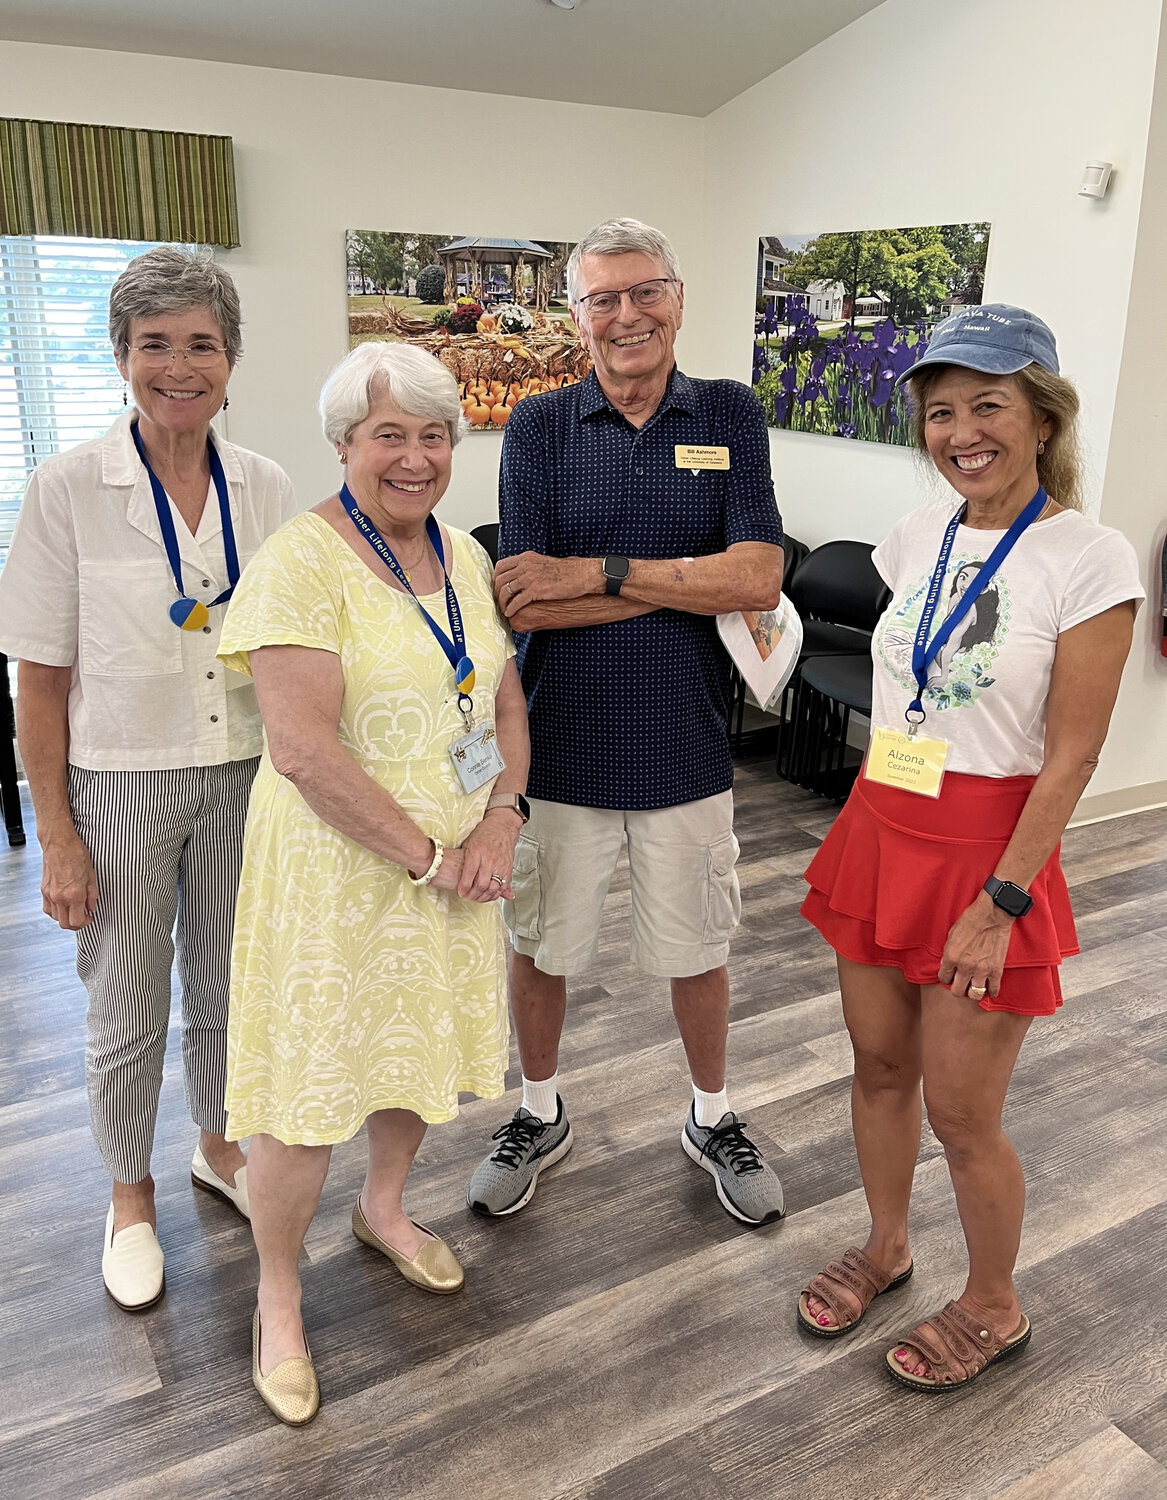 From left, University of Delaware’s Osher Lifelong Learning Institute volunteers and staff from the Lewes and Ocean View programs Trish Dennison, Connie Benko, Bill Ashmore and Cezarina Alzona.